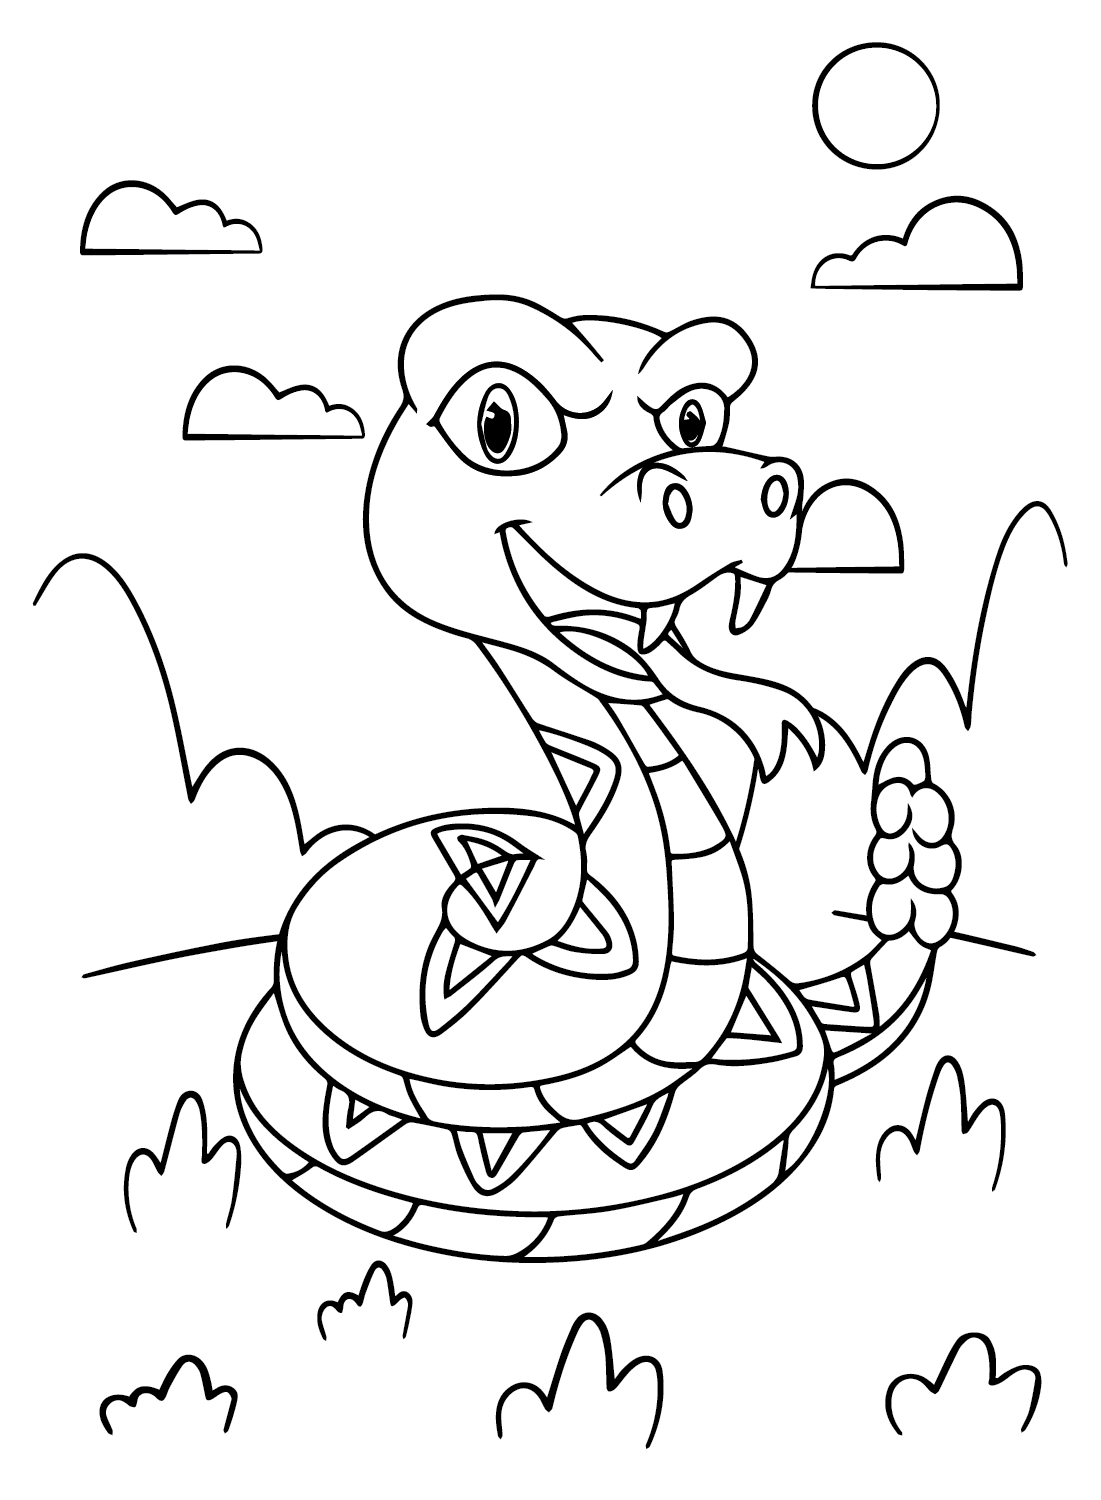 Rattlesnake coloring pages